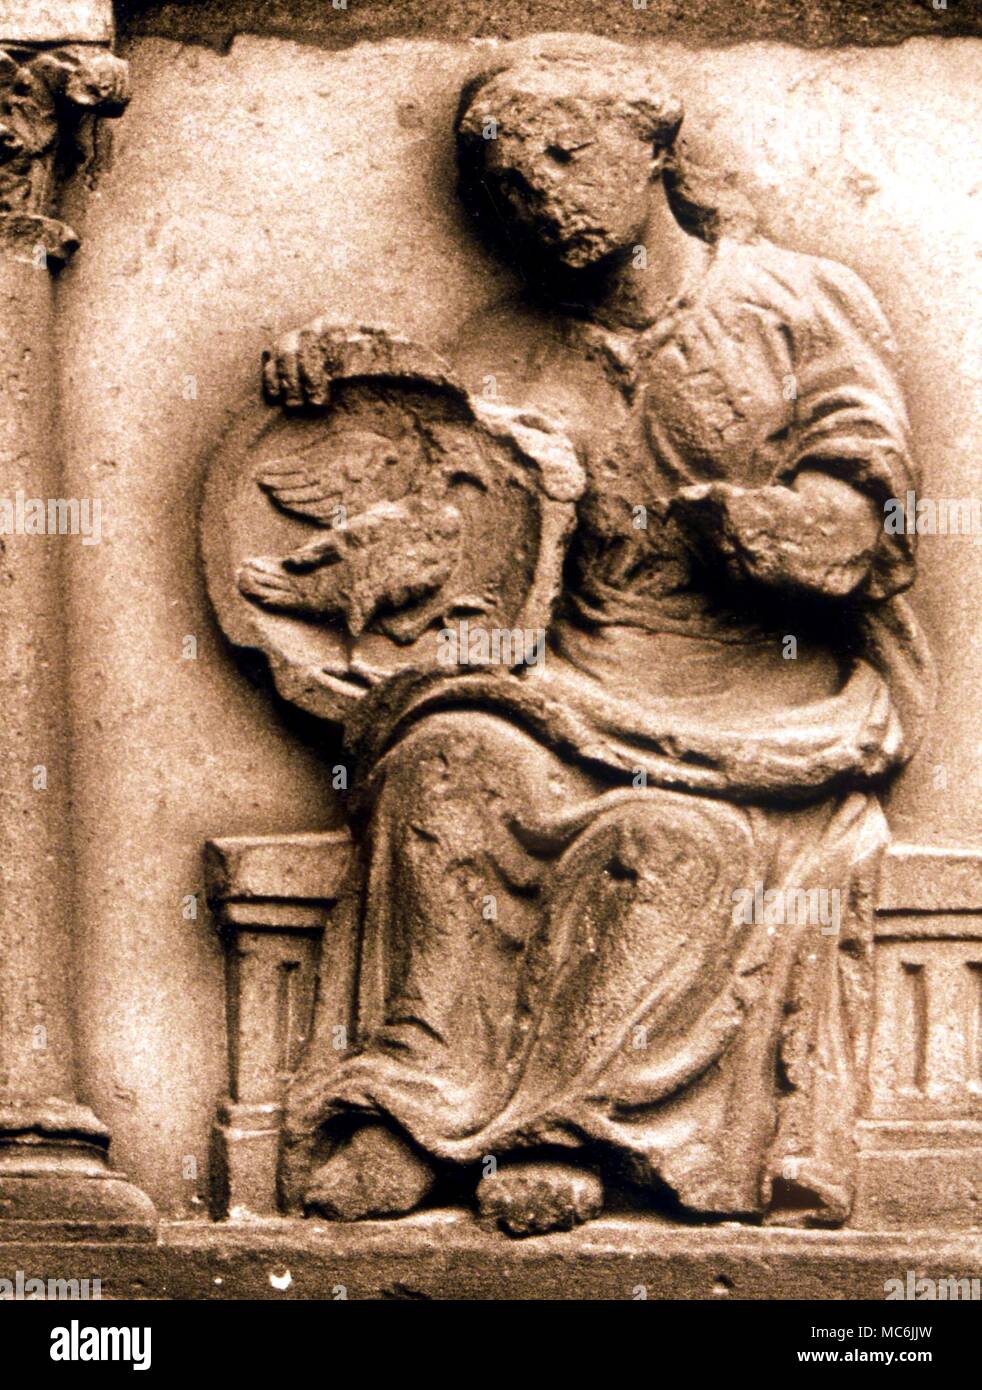 ALCHEMY - PUTREFACTION. Alchemical device of woman holding shield bearing a Crow, alchemical symbol of Putrefation. Thirteenth century relief on facade of Notre Dame, Paris Stock Photo